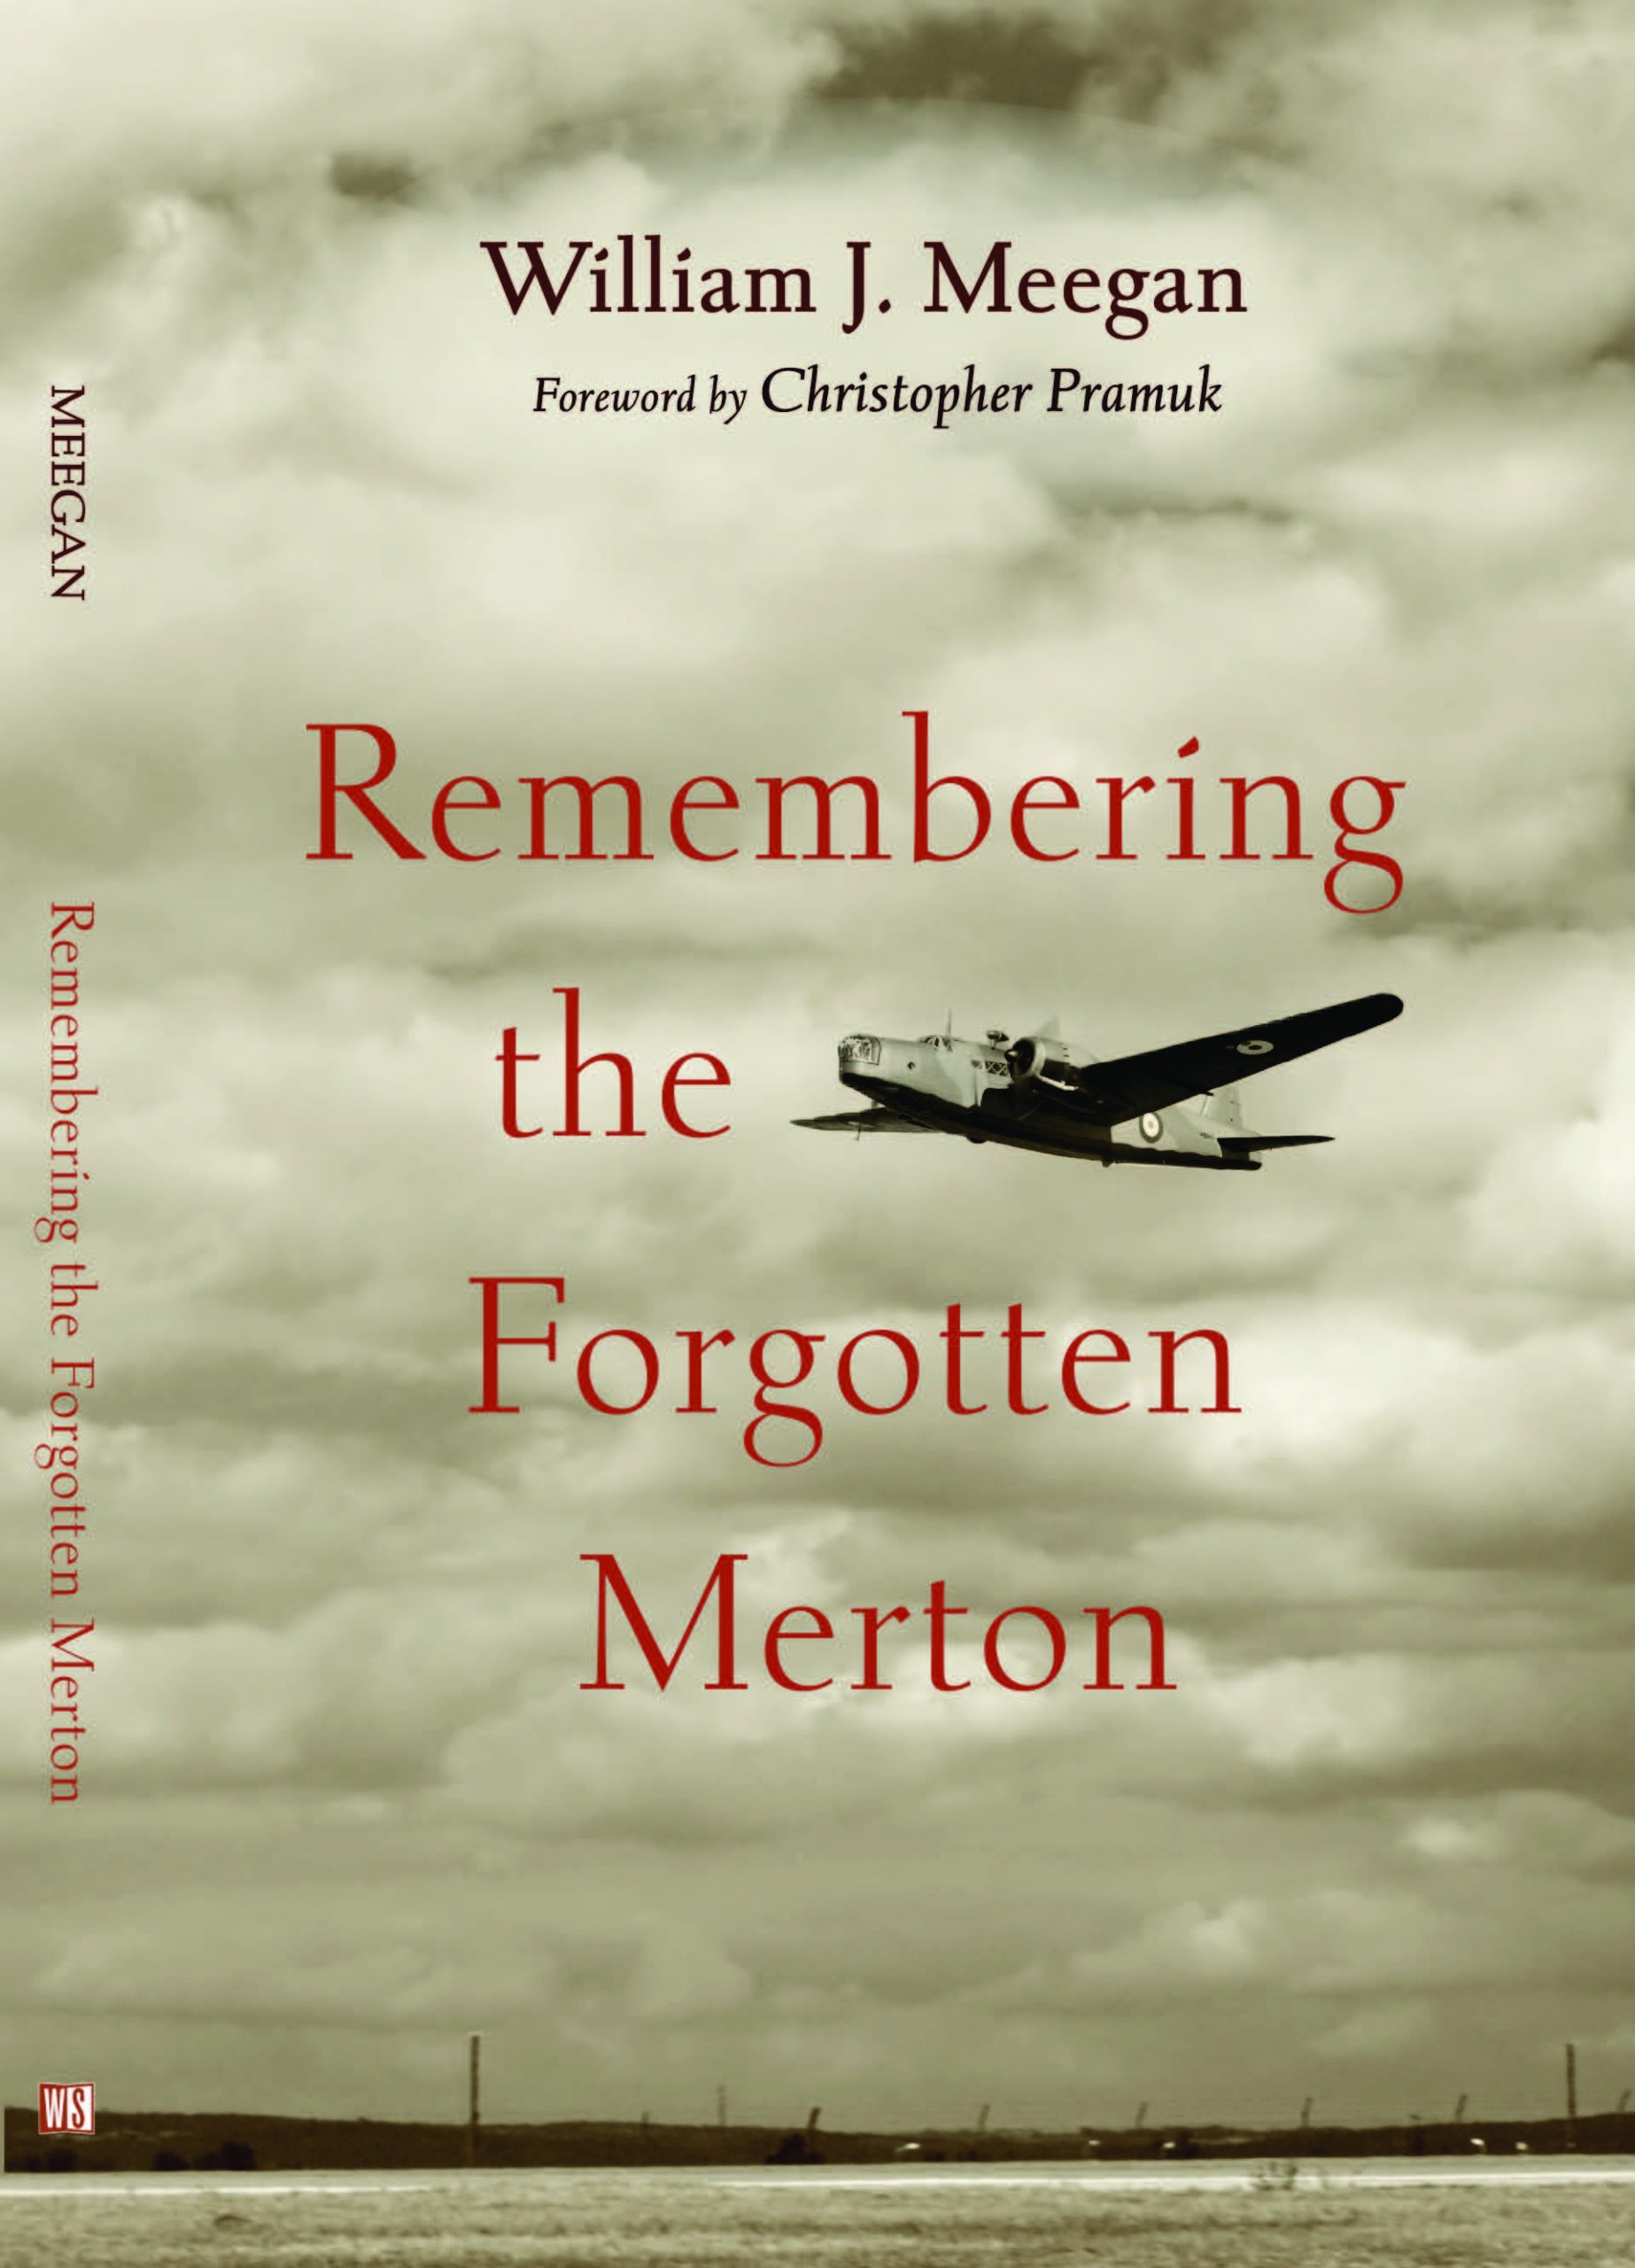 William J. Meegan to Participate in the Kentucky Book Festival with “Remembering the Forgotten Merton”